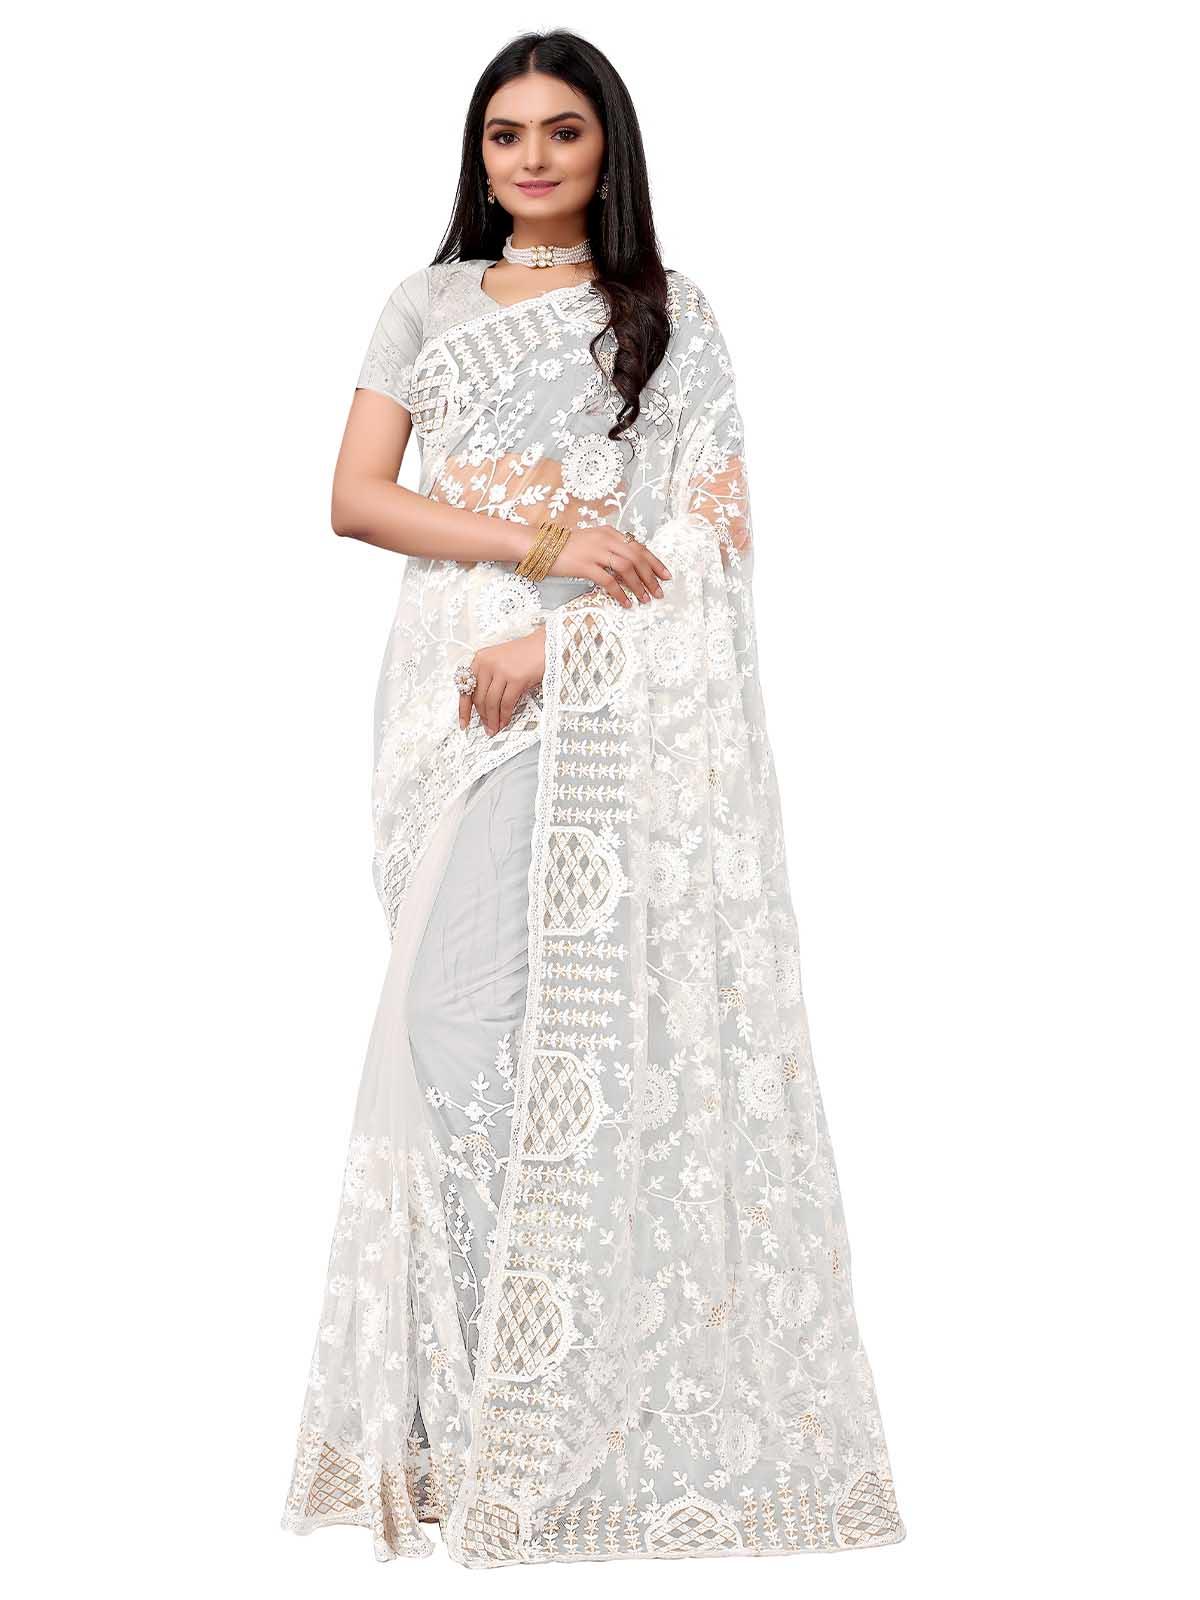 Women's Off White Net Embroidered Saree With Blouse - Odette